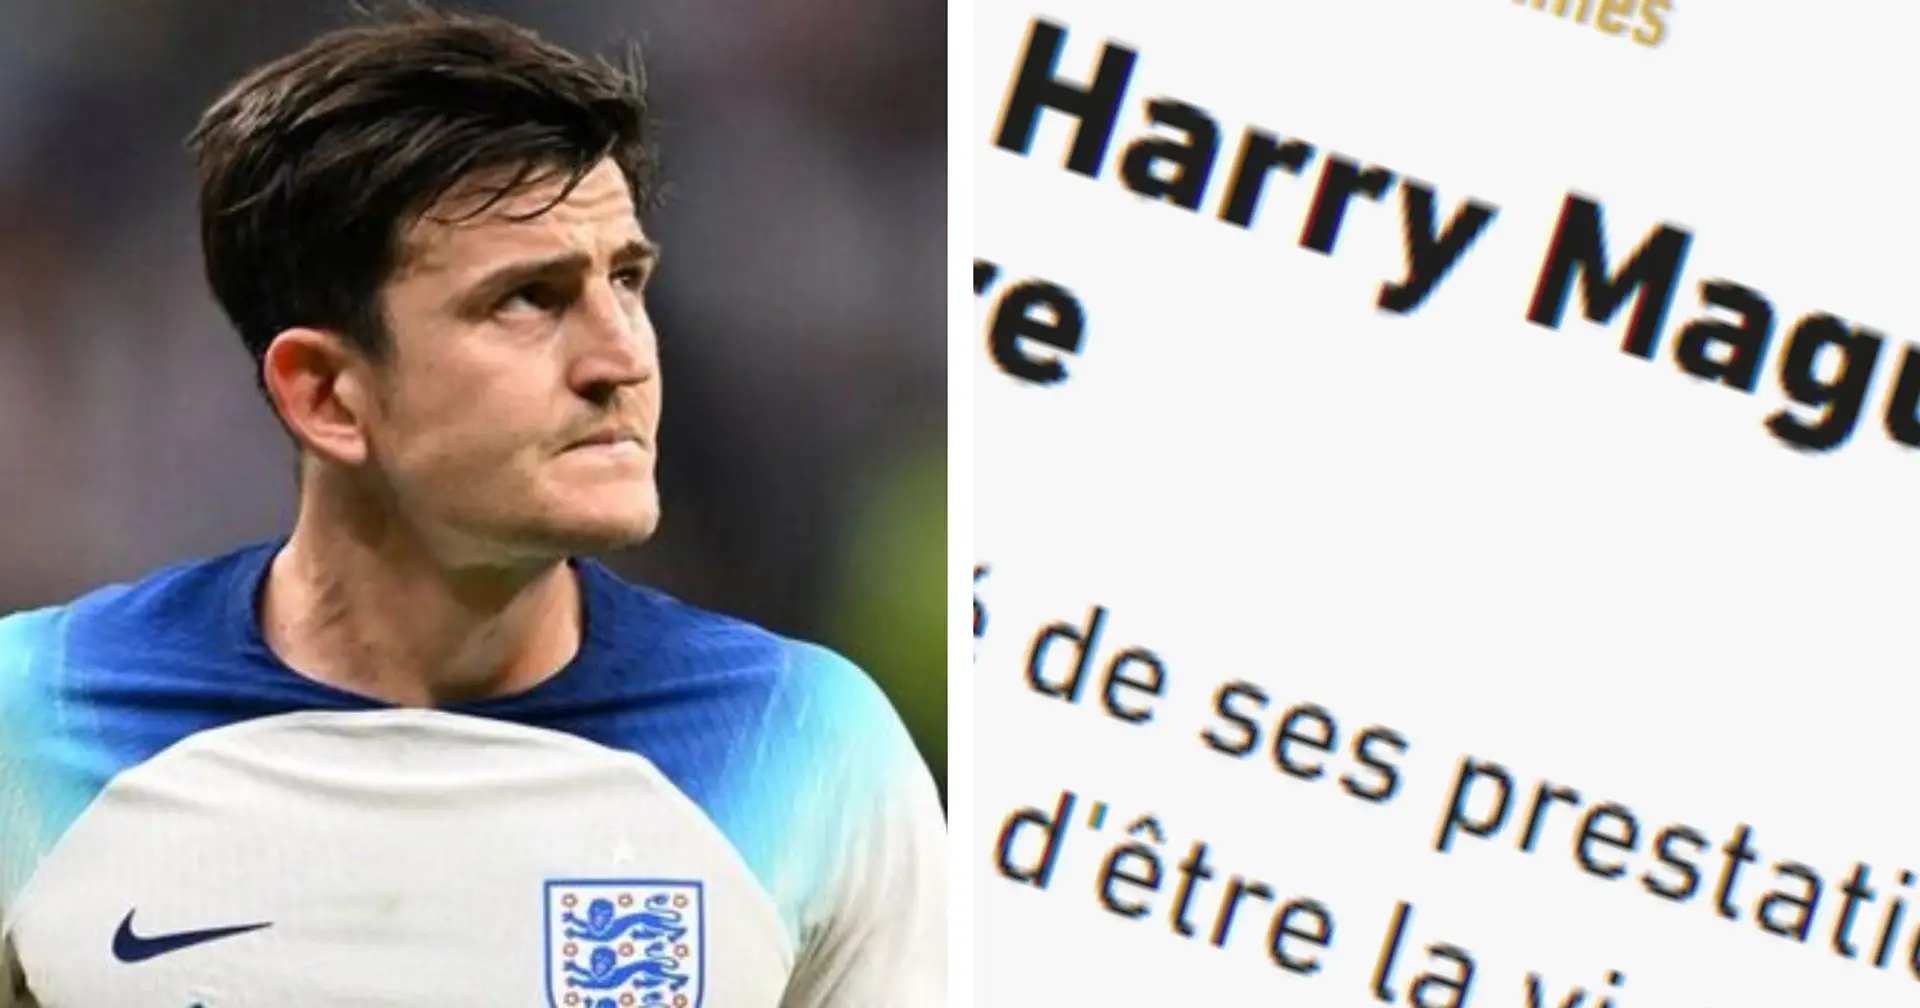 'Maguire's slowness could prove detrimental': French media take aim at Harry ahead of World Cup clash